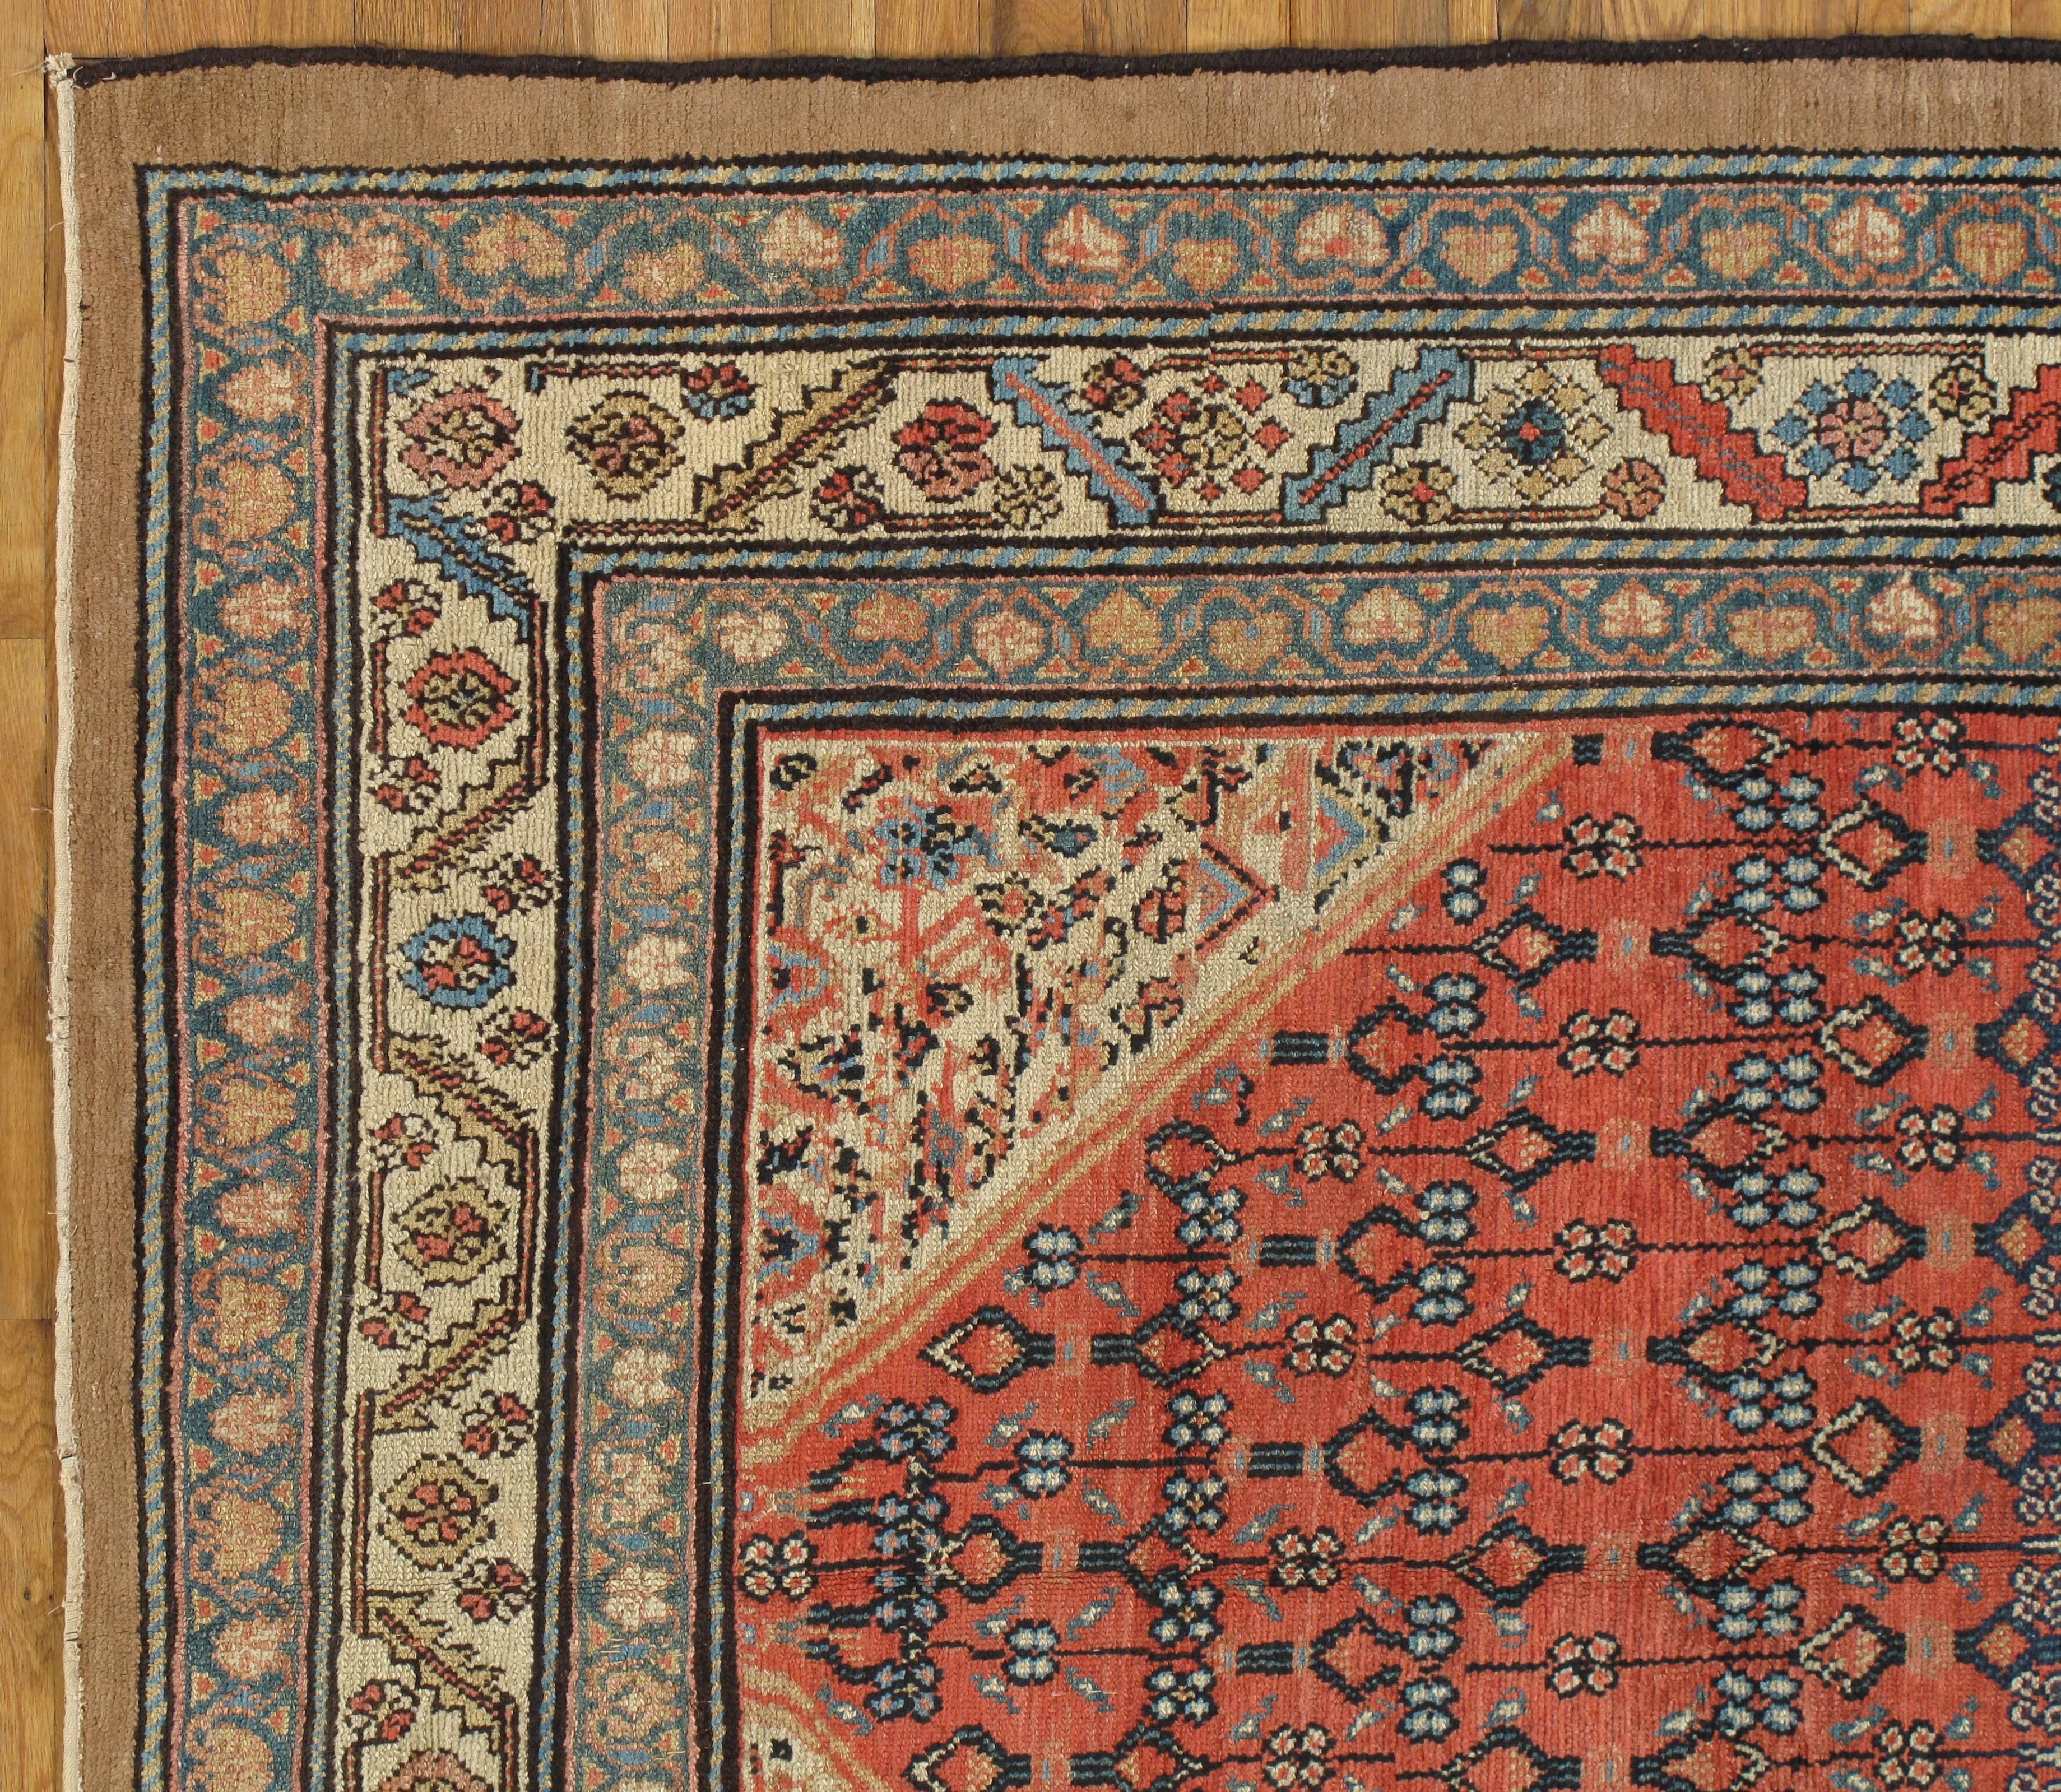 The village of Serab is known for their fine long runners with a characteristic camel ground and lozenge-shaped medallions. These rugs are woven in the village of Serab, located in the North West Region of Persia. Measures: 5'5